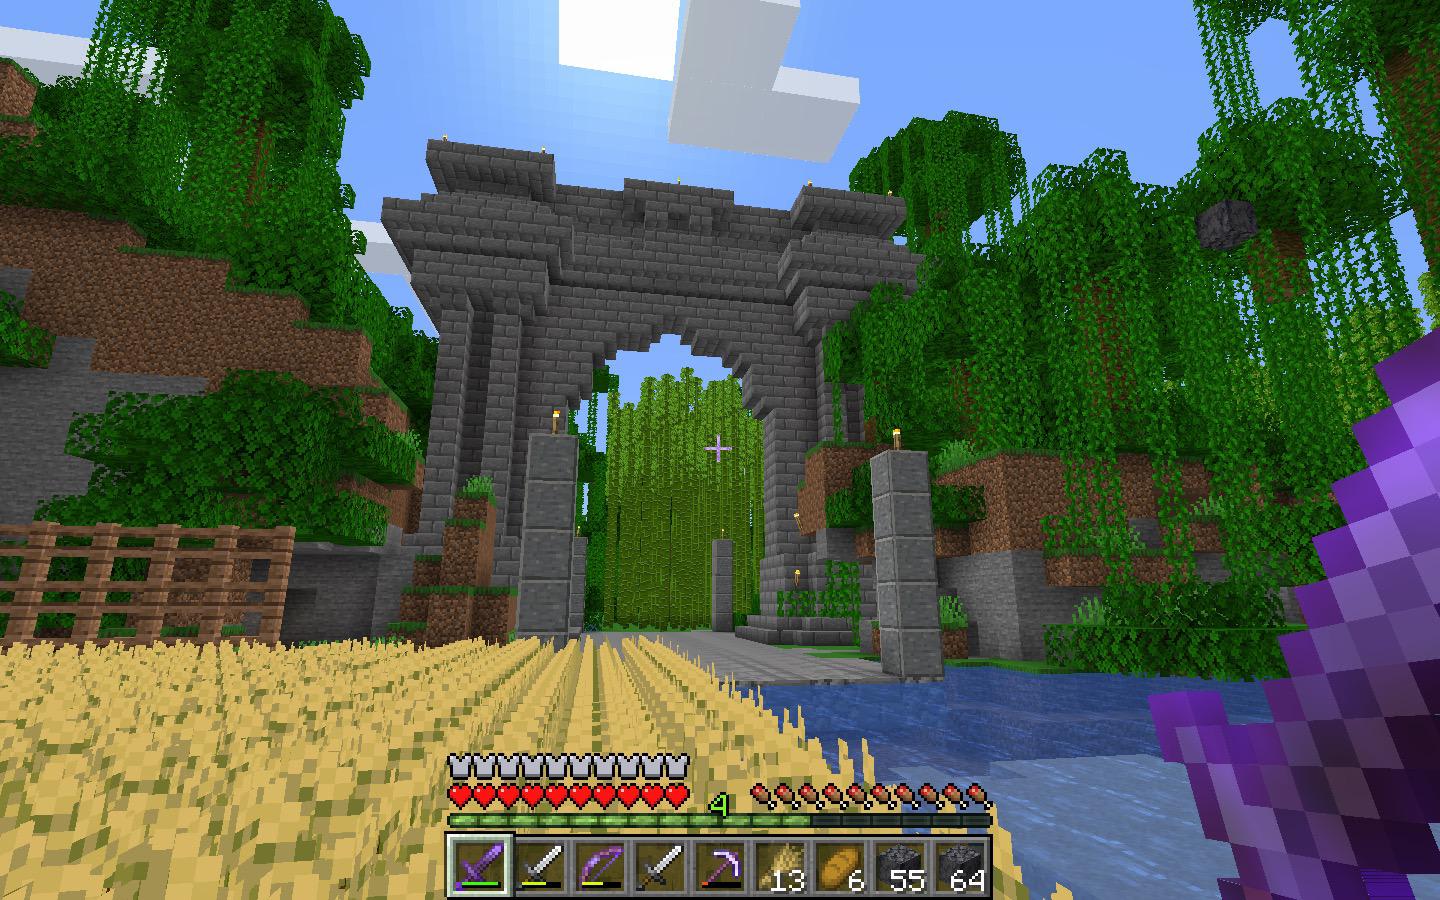 Roman Arch I built in my Survival World